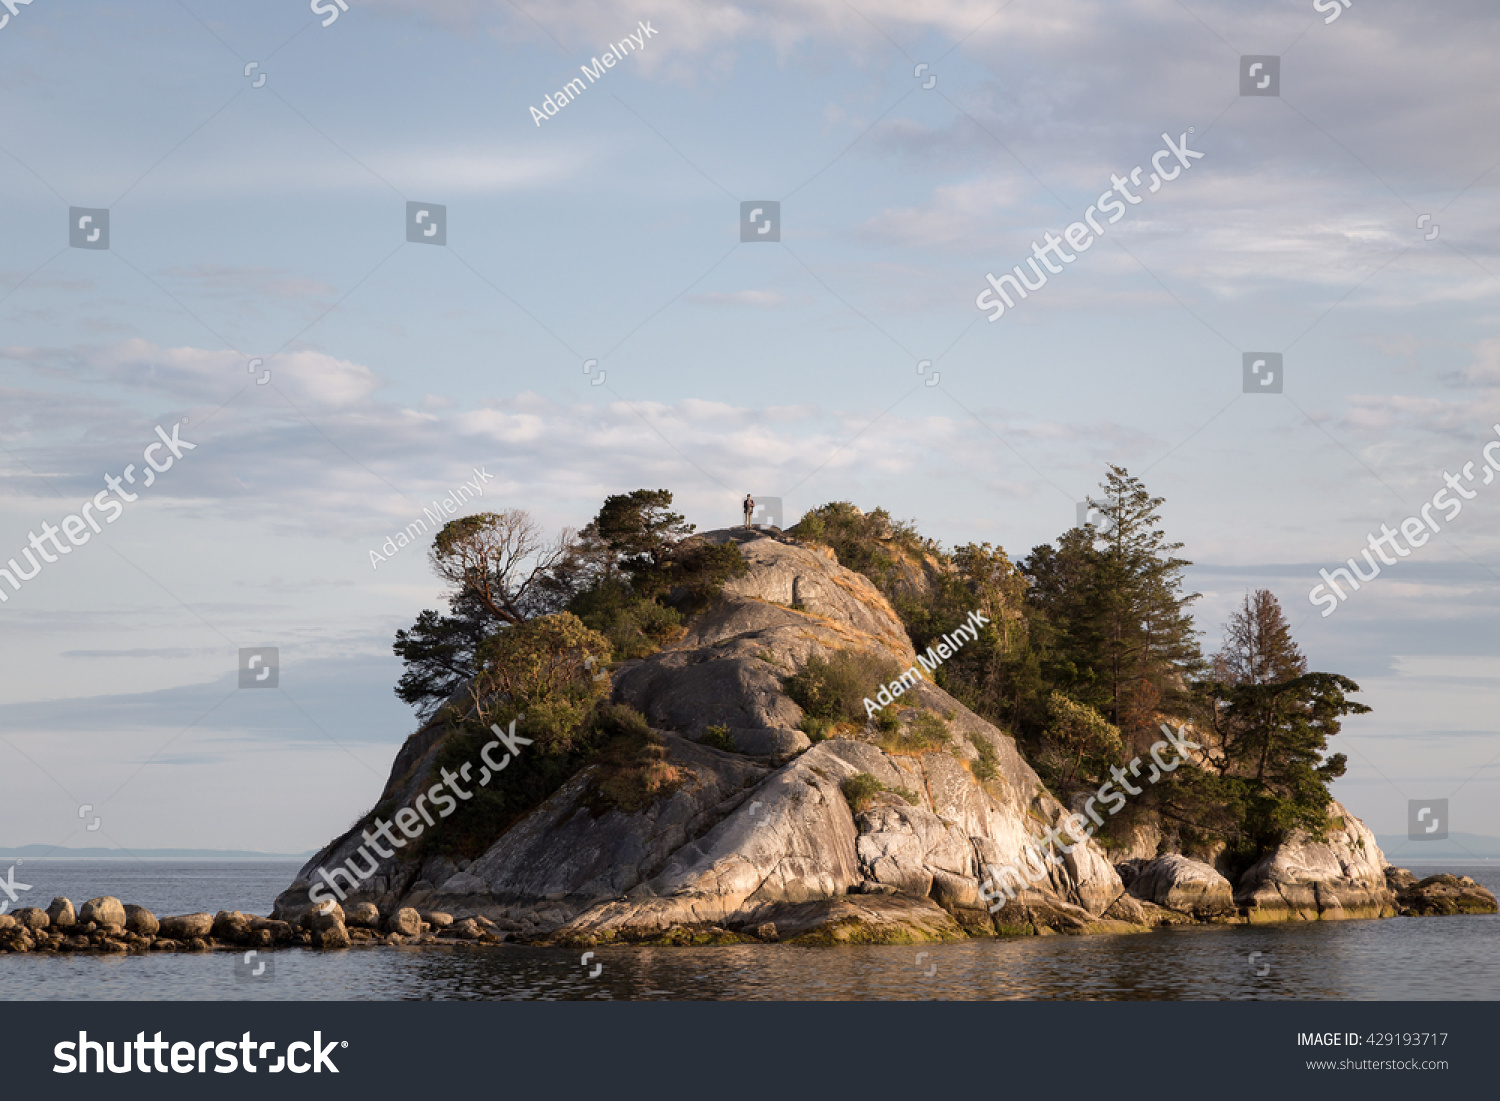 Perspective view of a man isolation at the top of a small island. #429193717